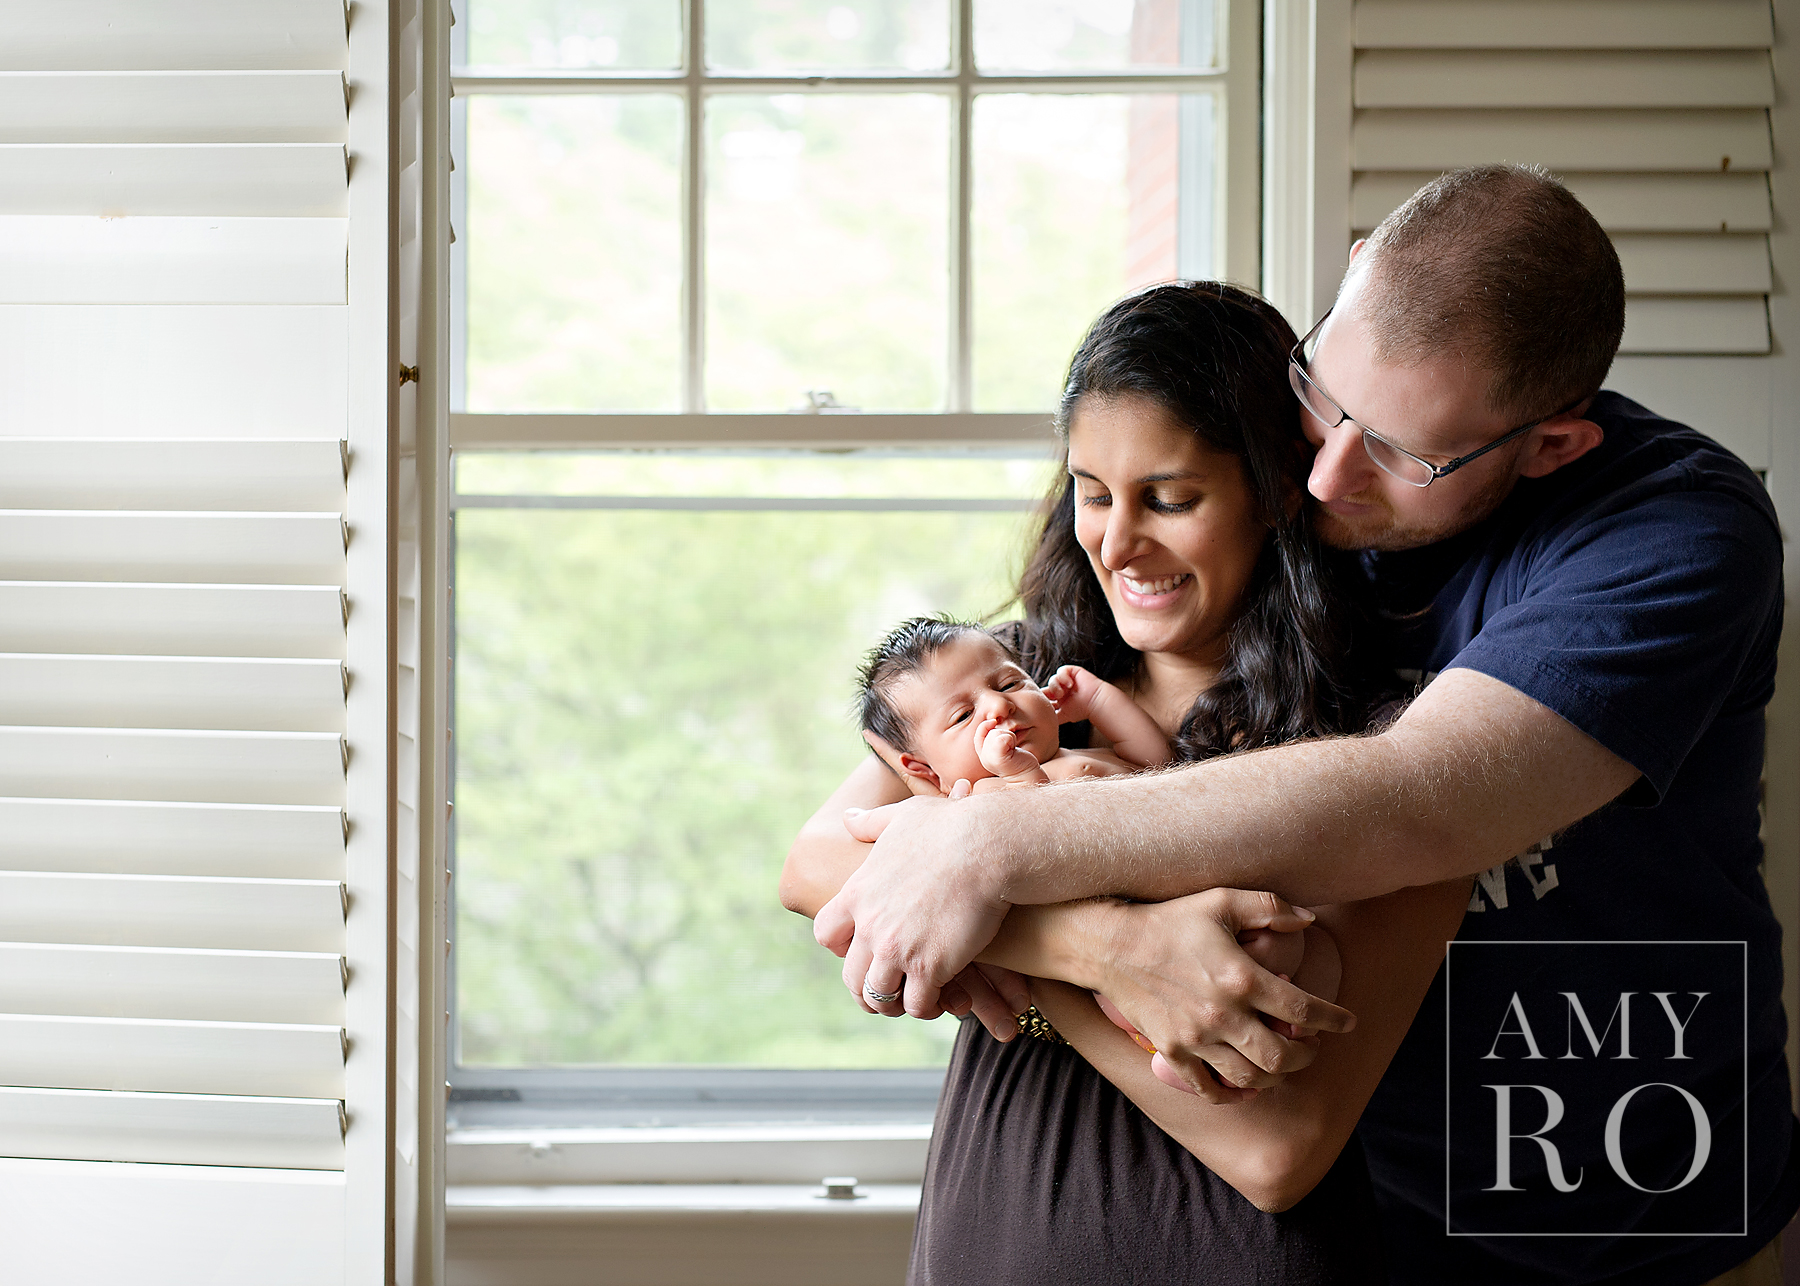 Image of mom and dad snuggling newborn baby girl in front of shuttered windows